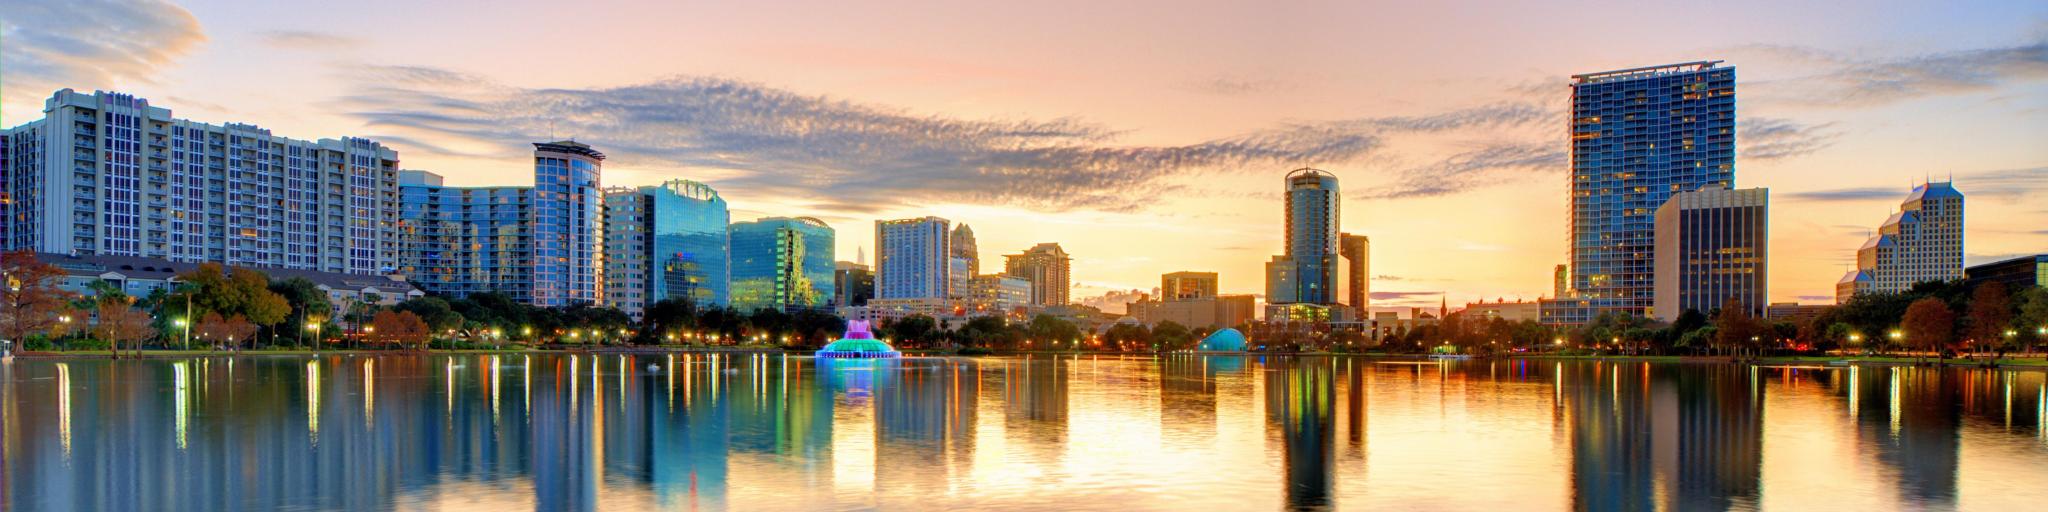 Orlando, Florida, USA with a view of the skyline of Orlando taken from lake Eola at sunset.